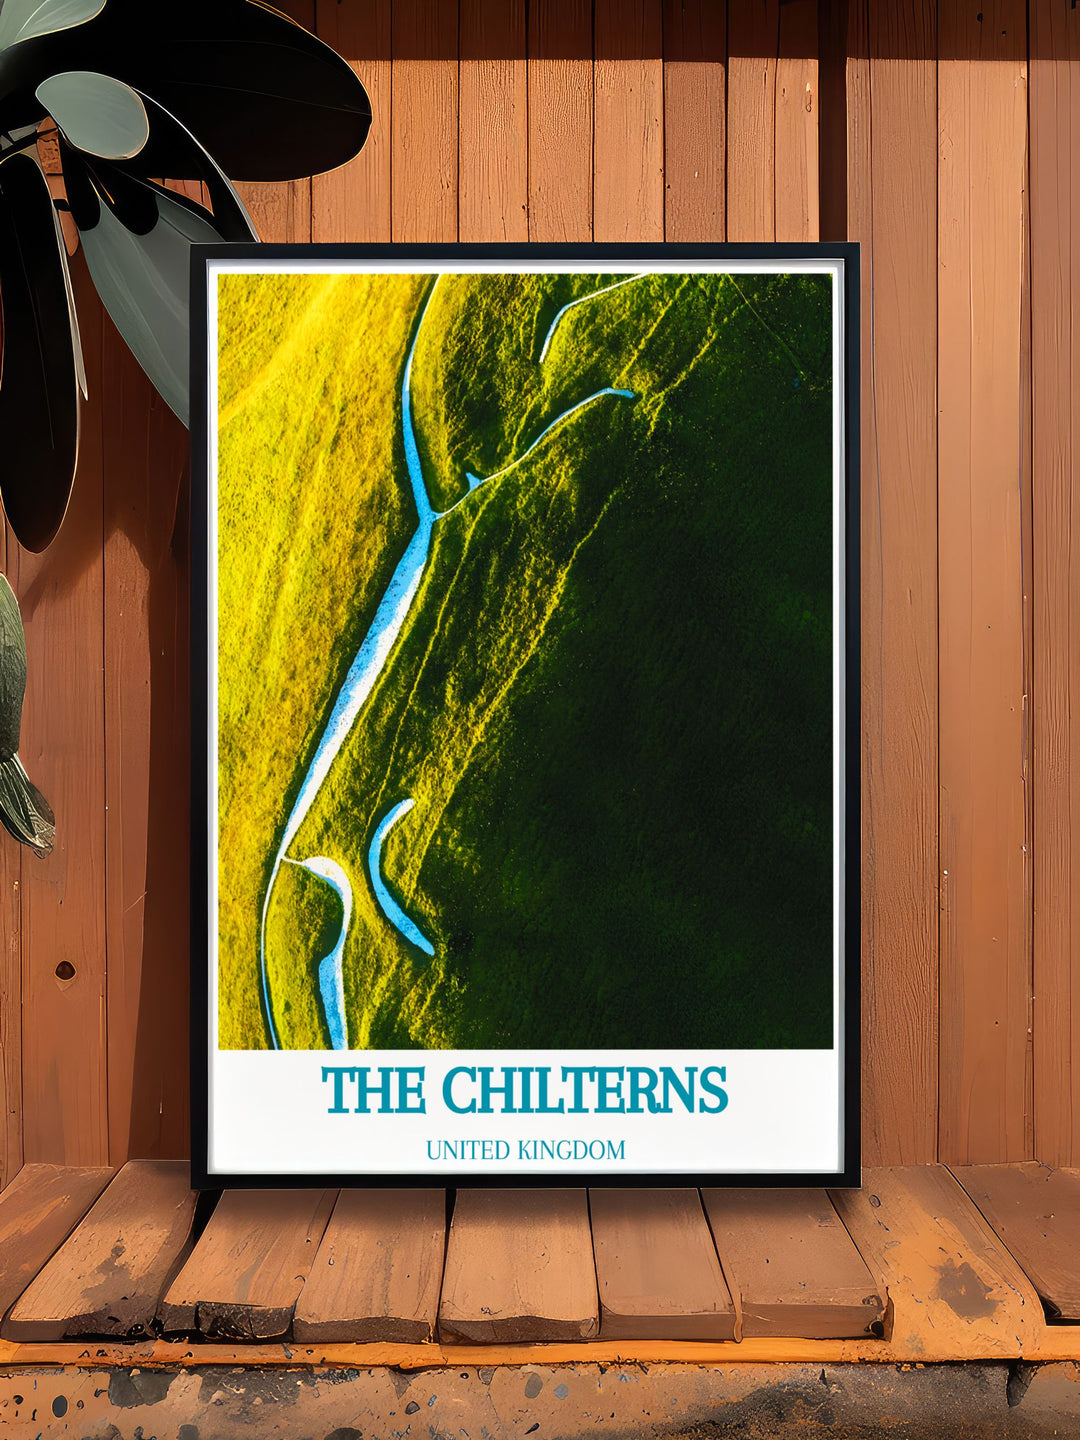 Custom Prints of The Chilterns allowing for personalized artwork that highlights your favorite spots in this picturesque region, perfect for unique home decor.